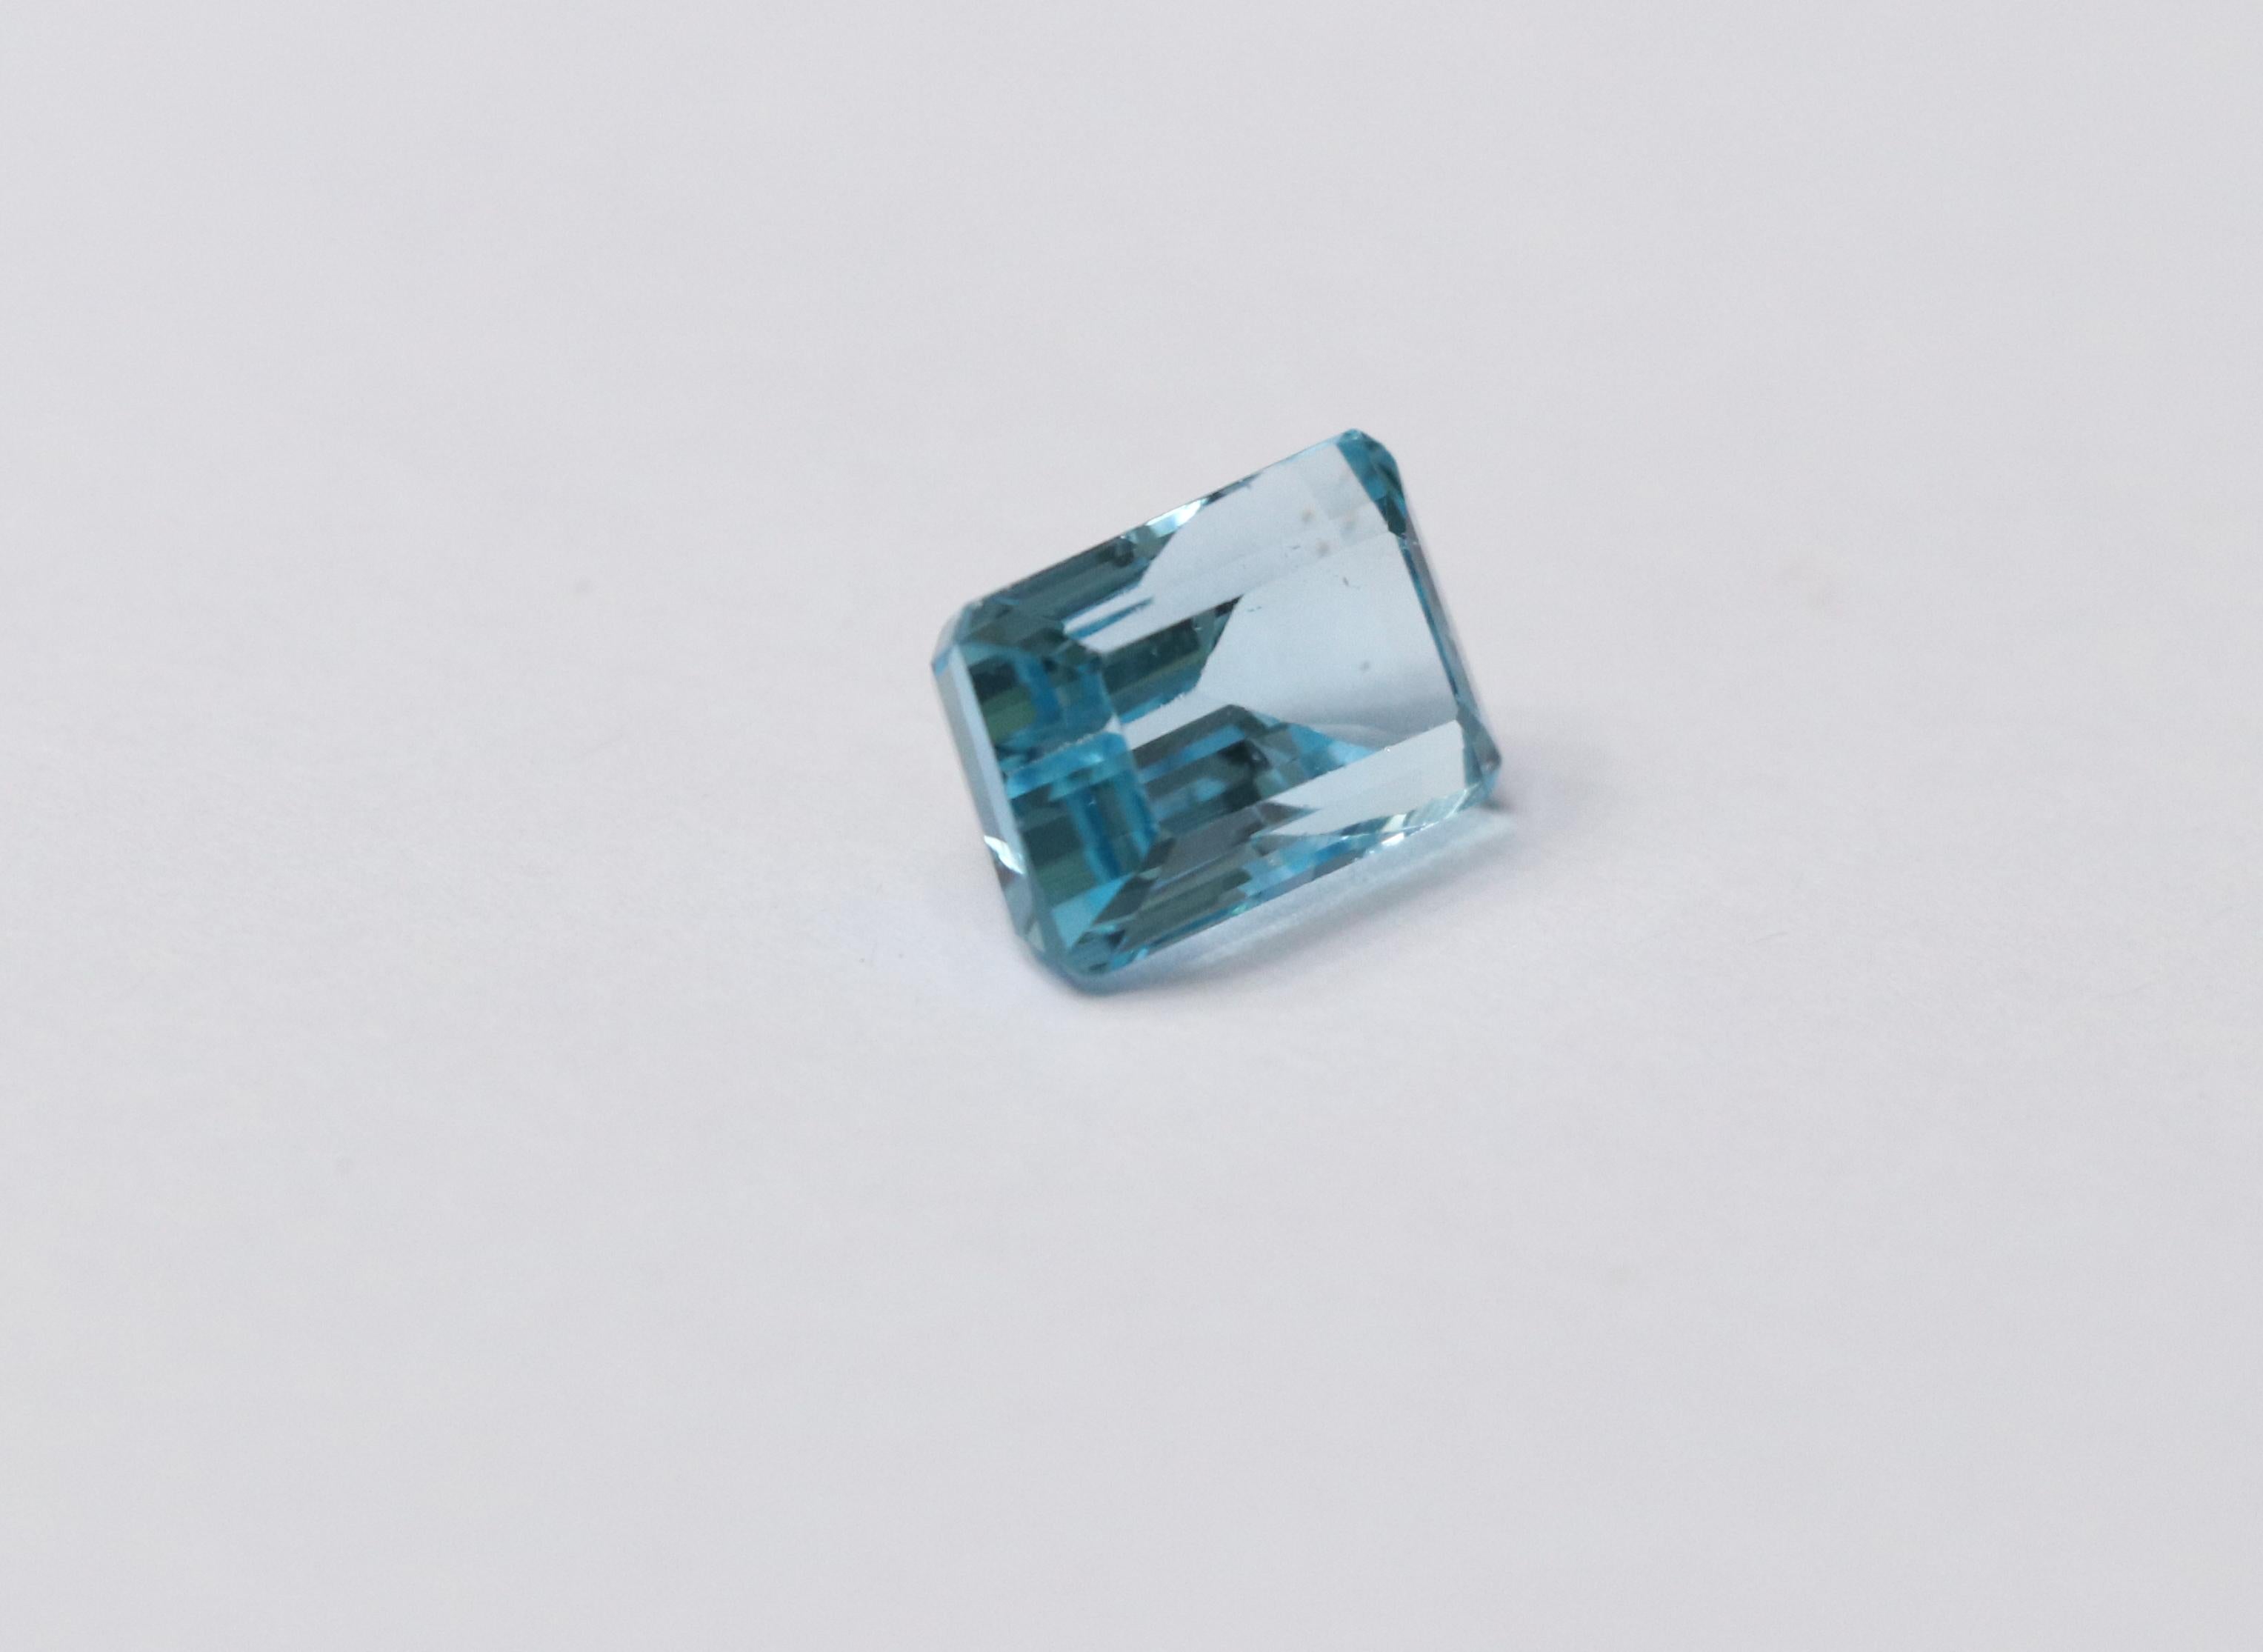 10.55 Carat Aquamarine Emerald-Cut Unset Loose 3-Stone Ring Gemstone

Length: 9 mm
Width: 14.10 mm
Height: 8.15 mm

Note:
We can make any custom jewelry piece with this aquamarine.
Laboratory Certification can be done on request.
Certificate of